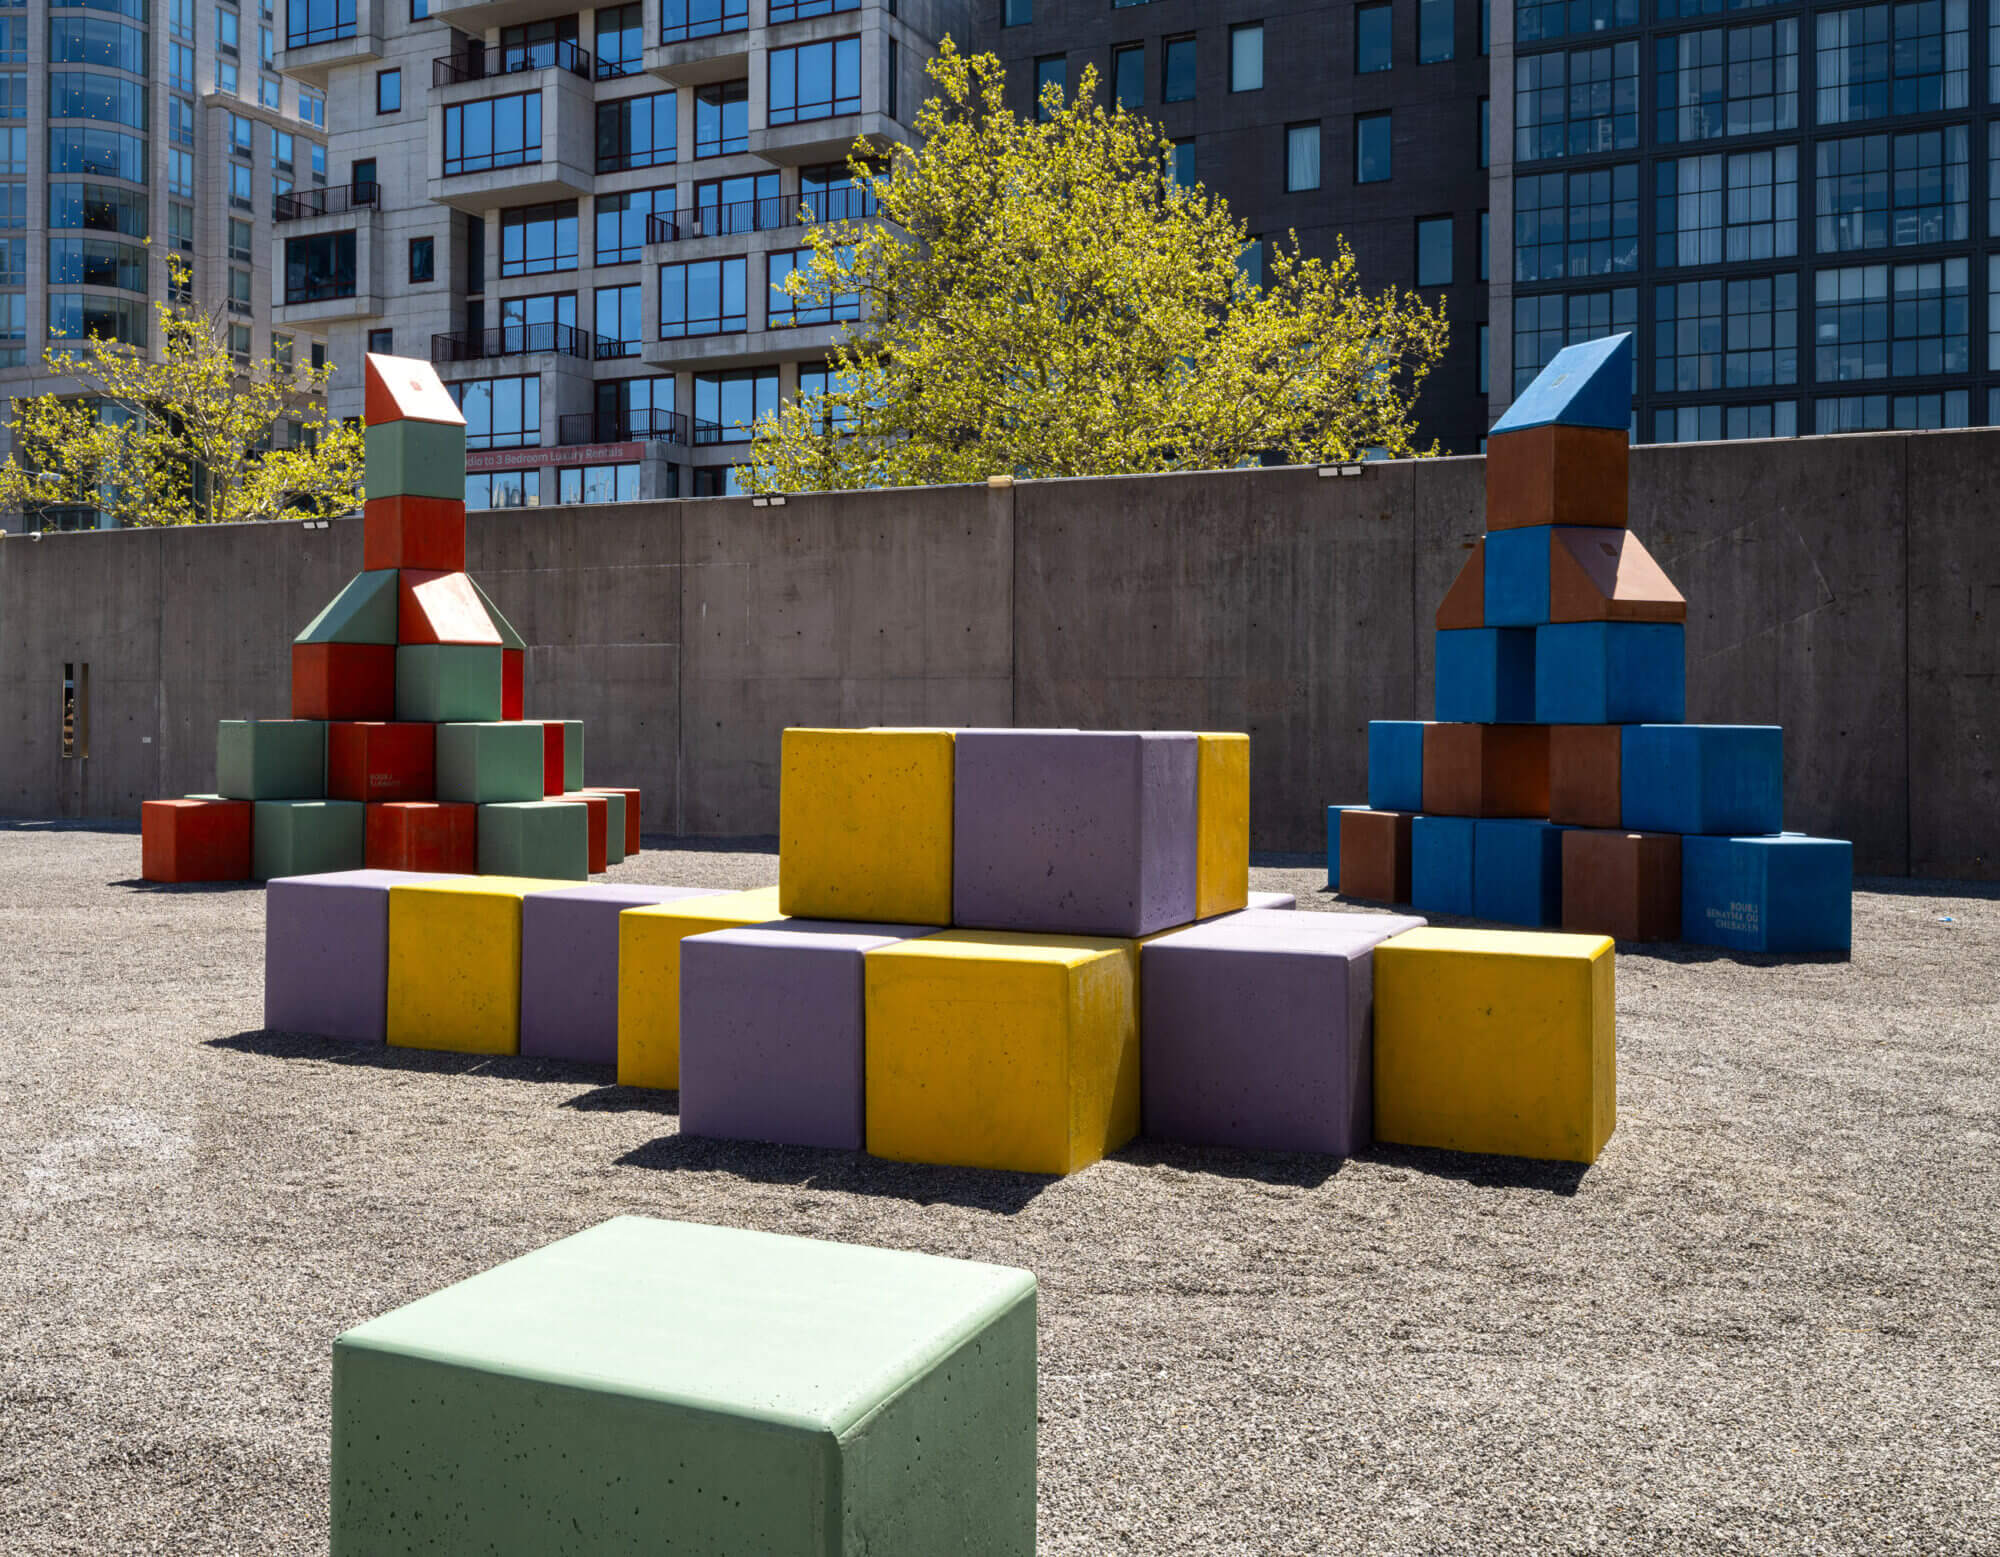 colorful cubes by Yto Barrada on view with buildings in the background